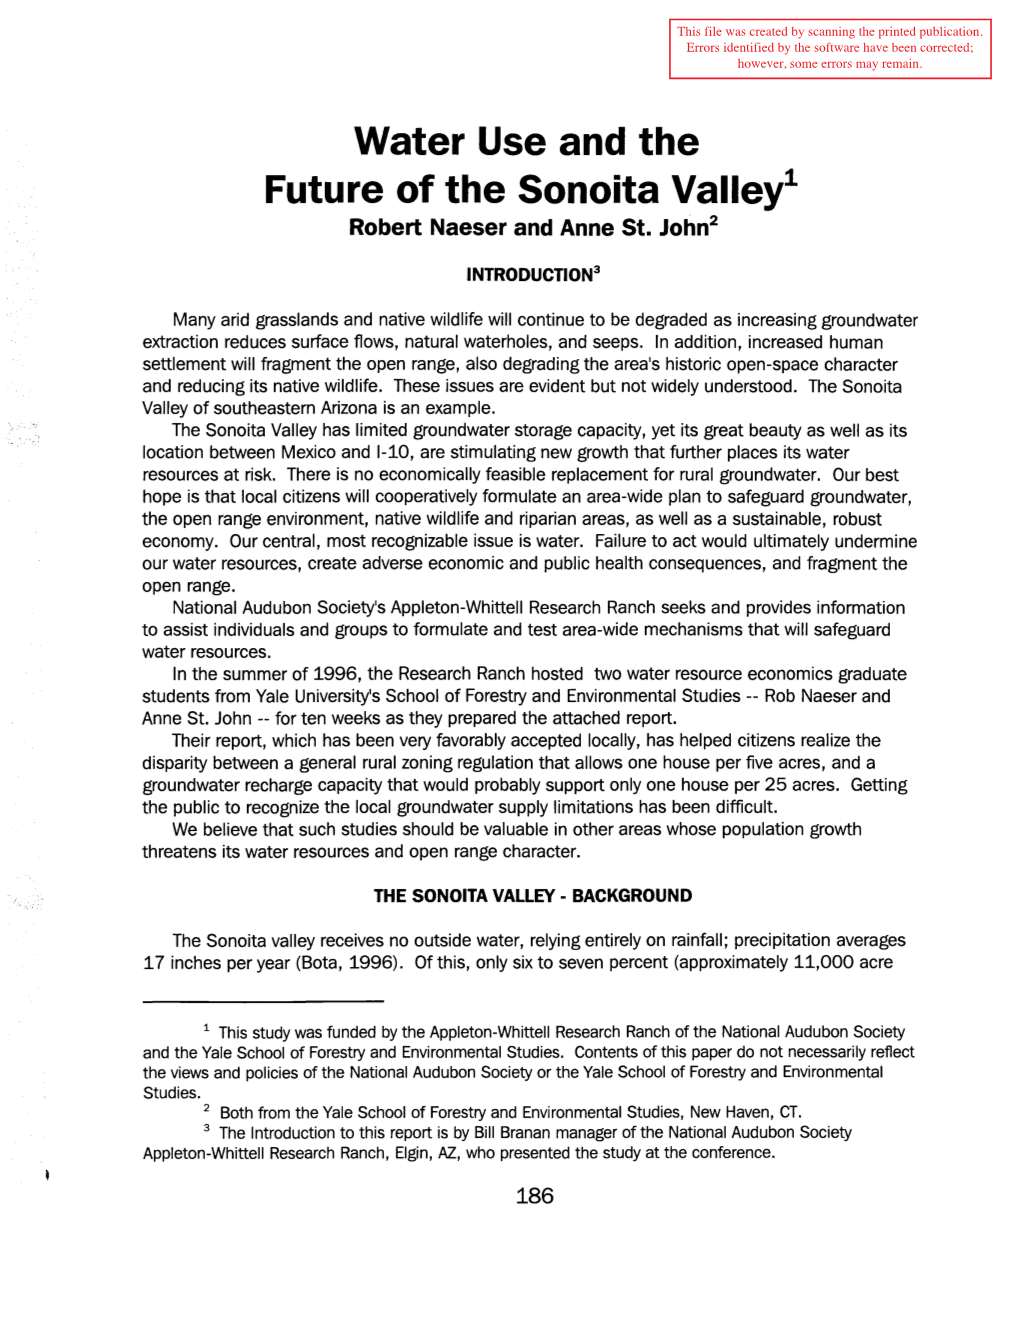 Water Use and the Future of the Sonoita Valley1 Robert Naeser and Anne St